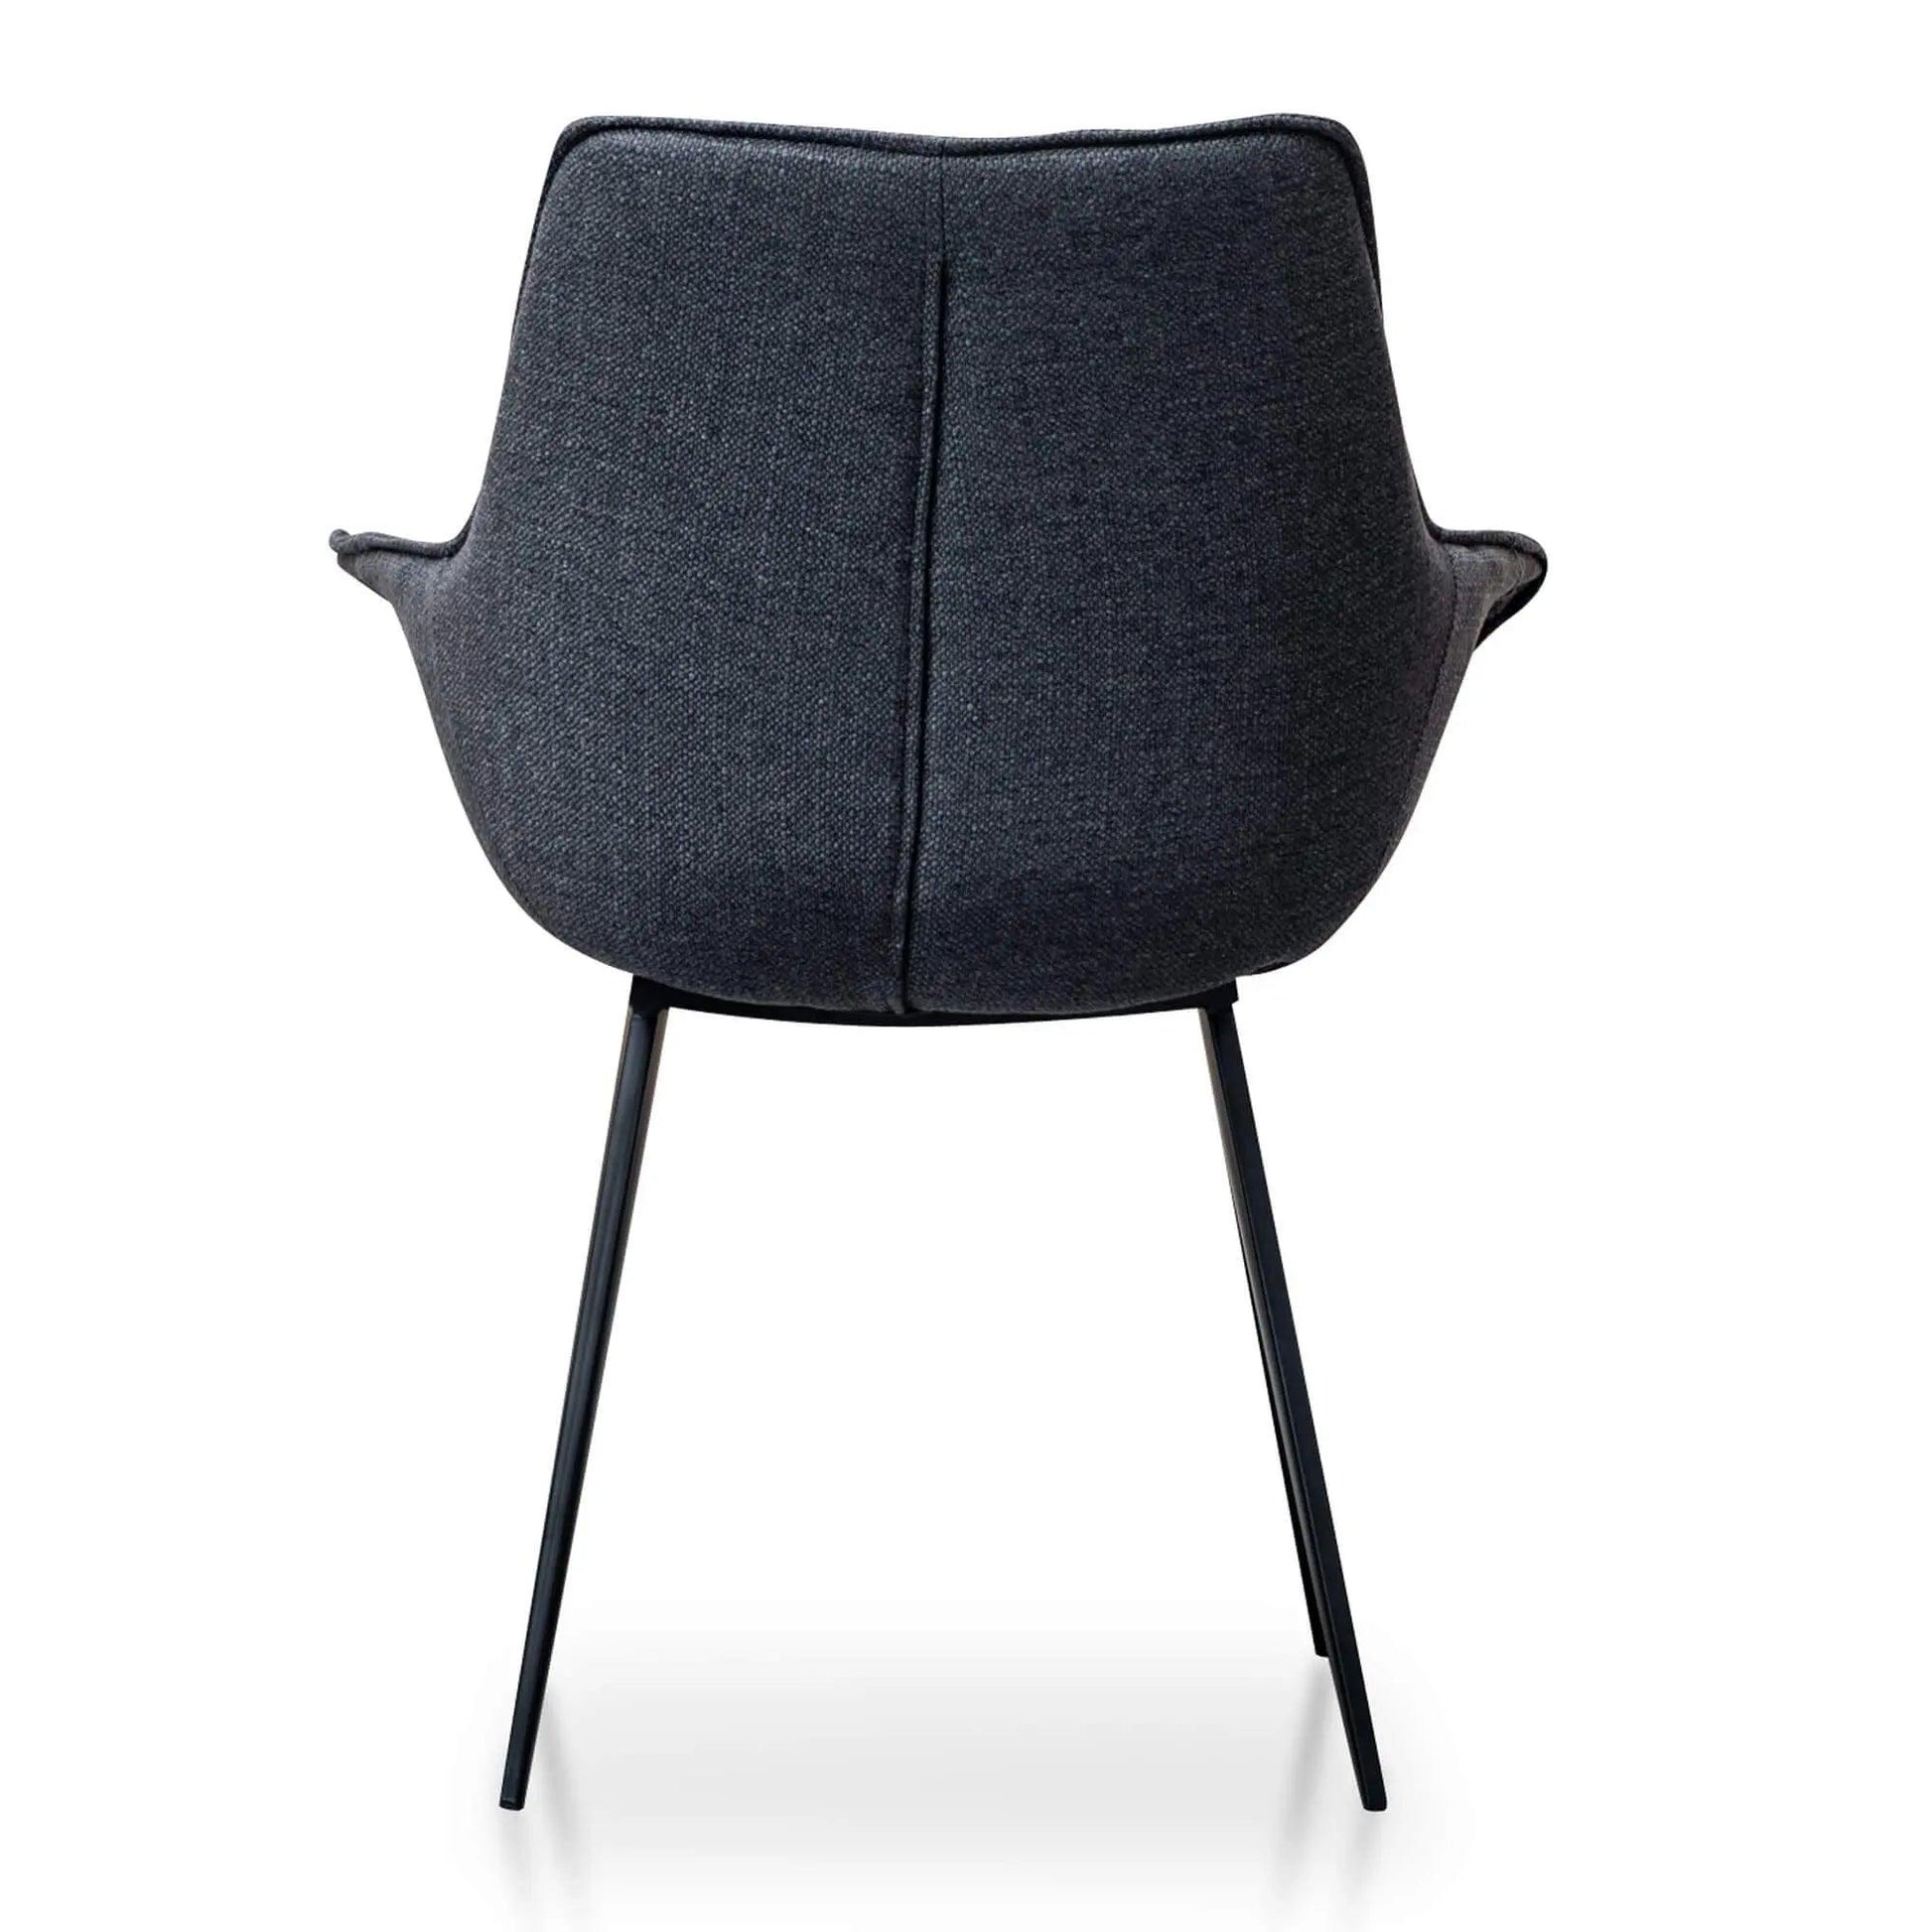 Calibre Dining Chair - Charcoal Grey (Set of 2) DC2633-SEx2 - Dining ChairsDC2633-SEx2 4